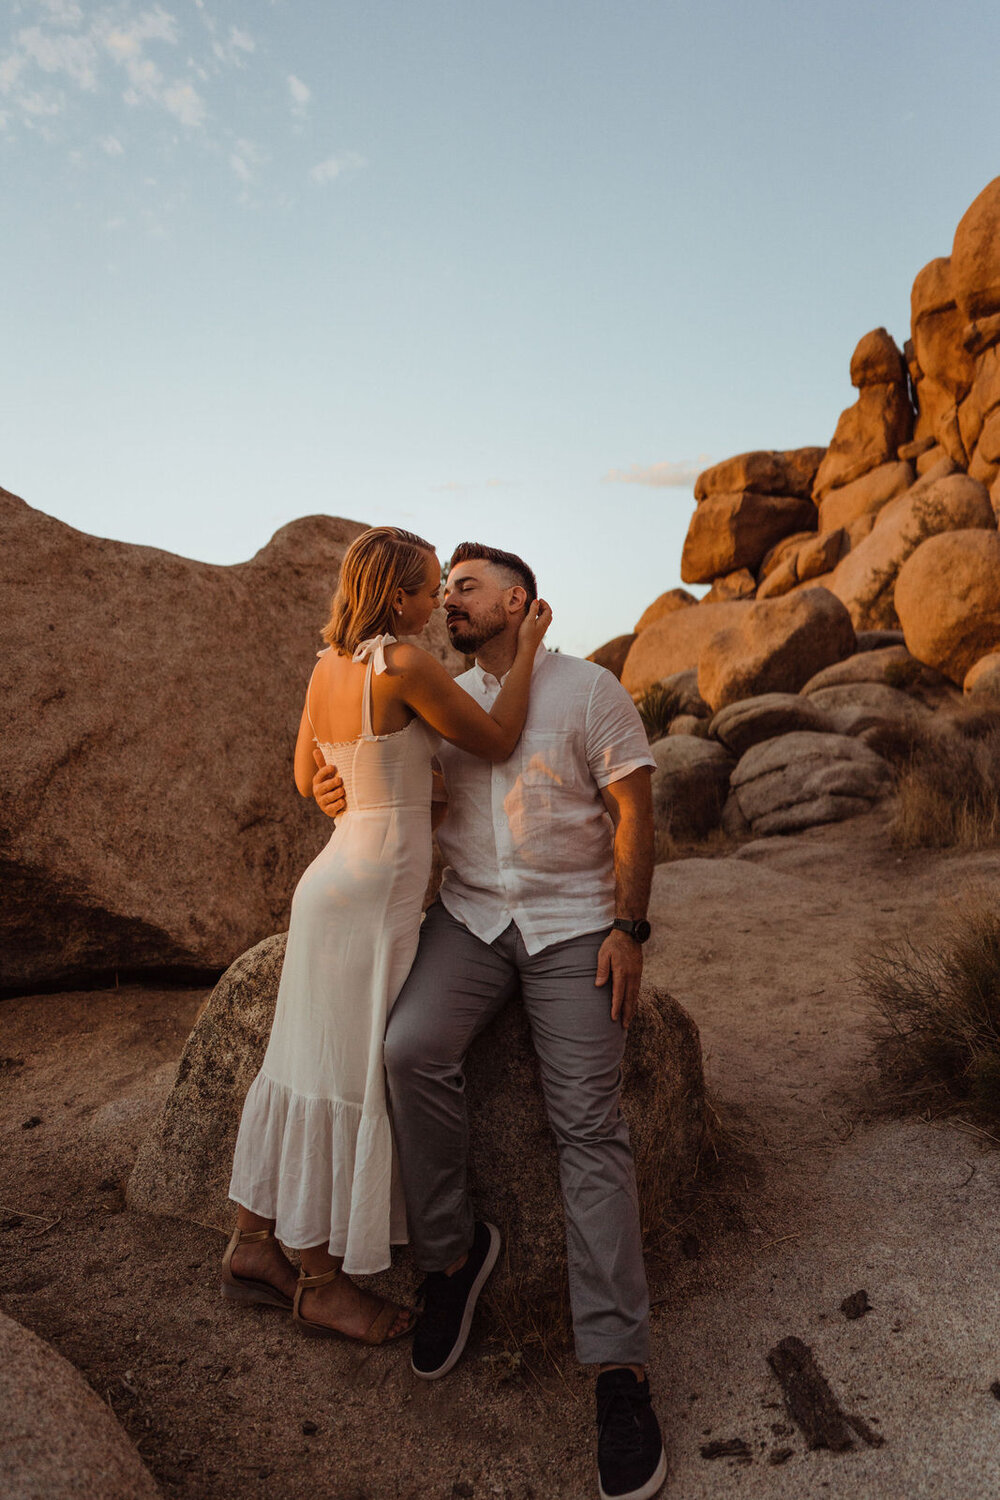 Sunrise Engagement Session in Joshua Tree, California - Woman Leans on Man Sitting on Rock - Photos by Adventurous Elopement + Wedding Photographer Kept Record | www.keptrecord.com